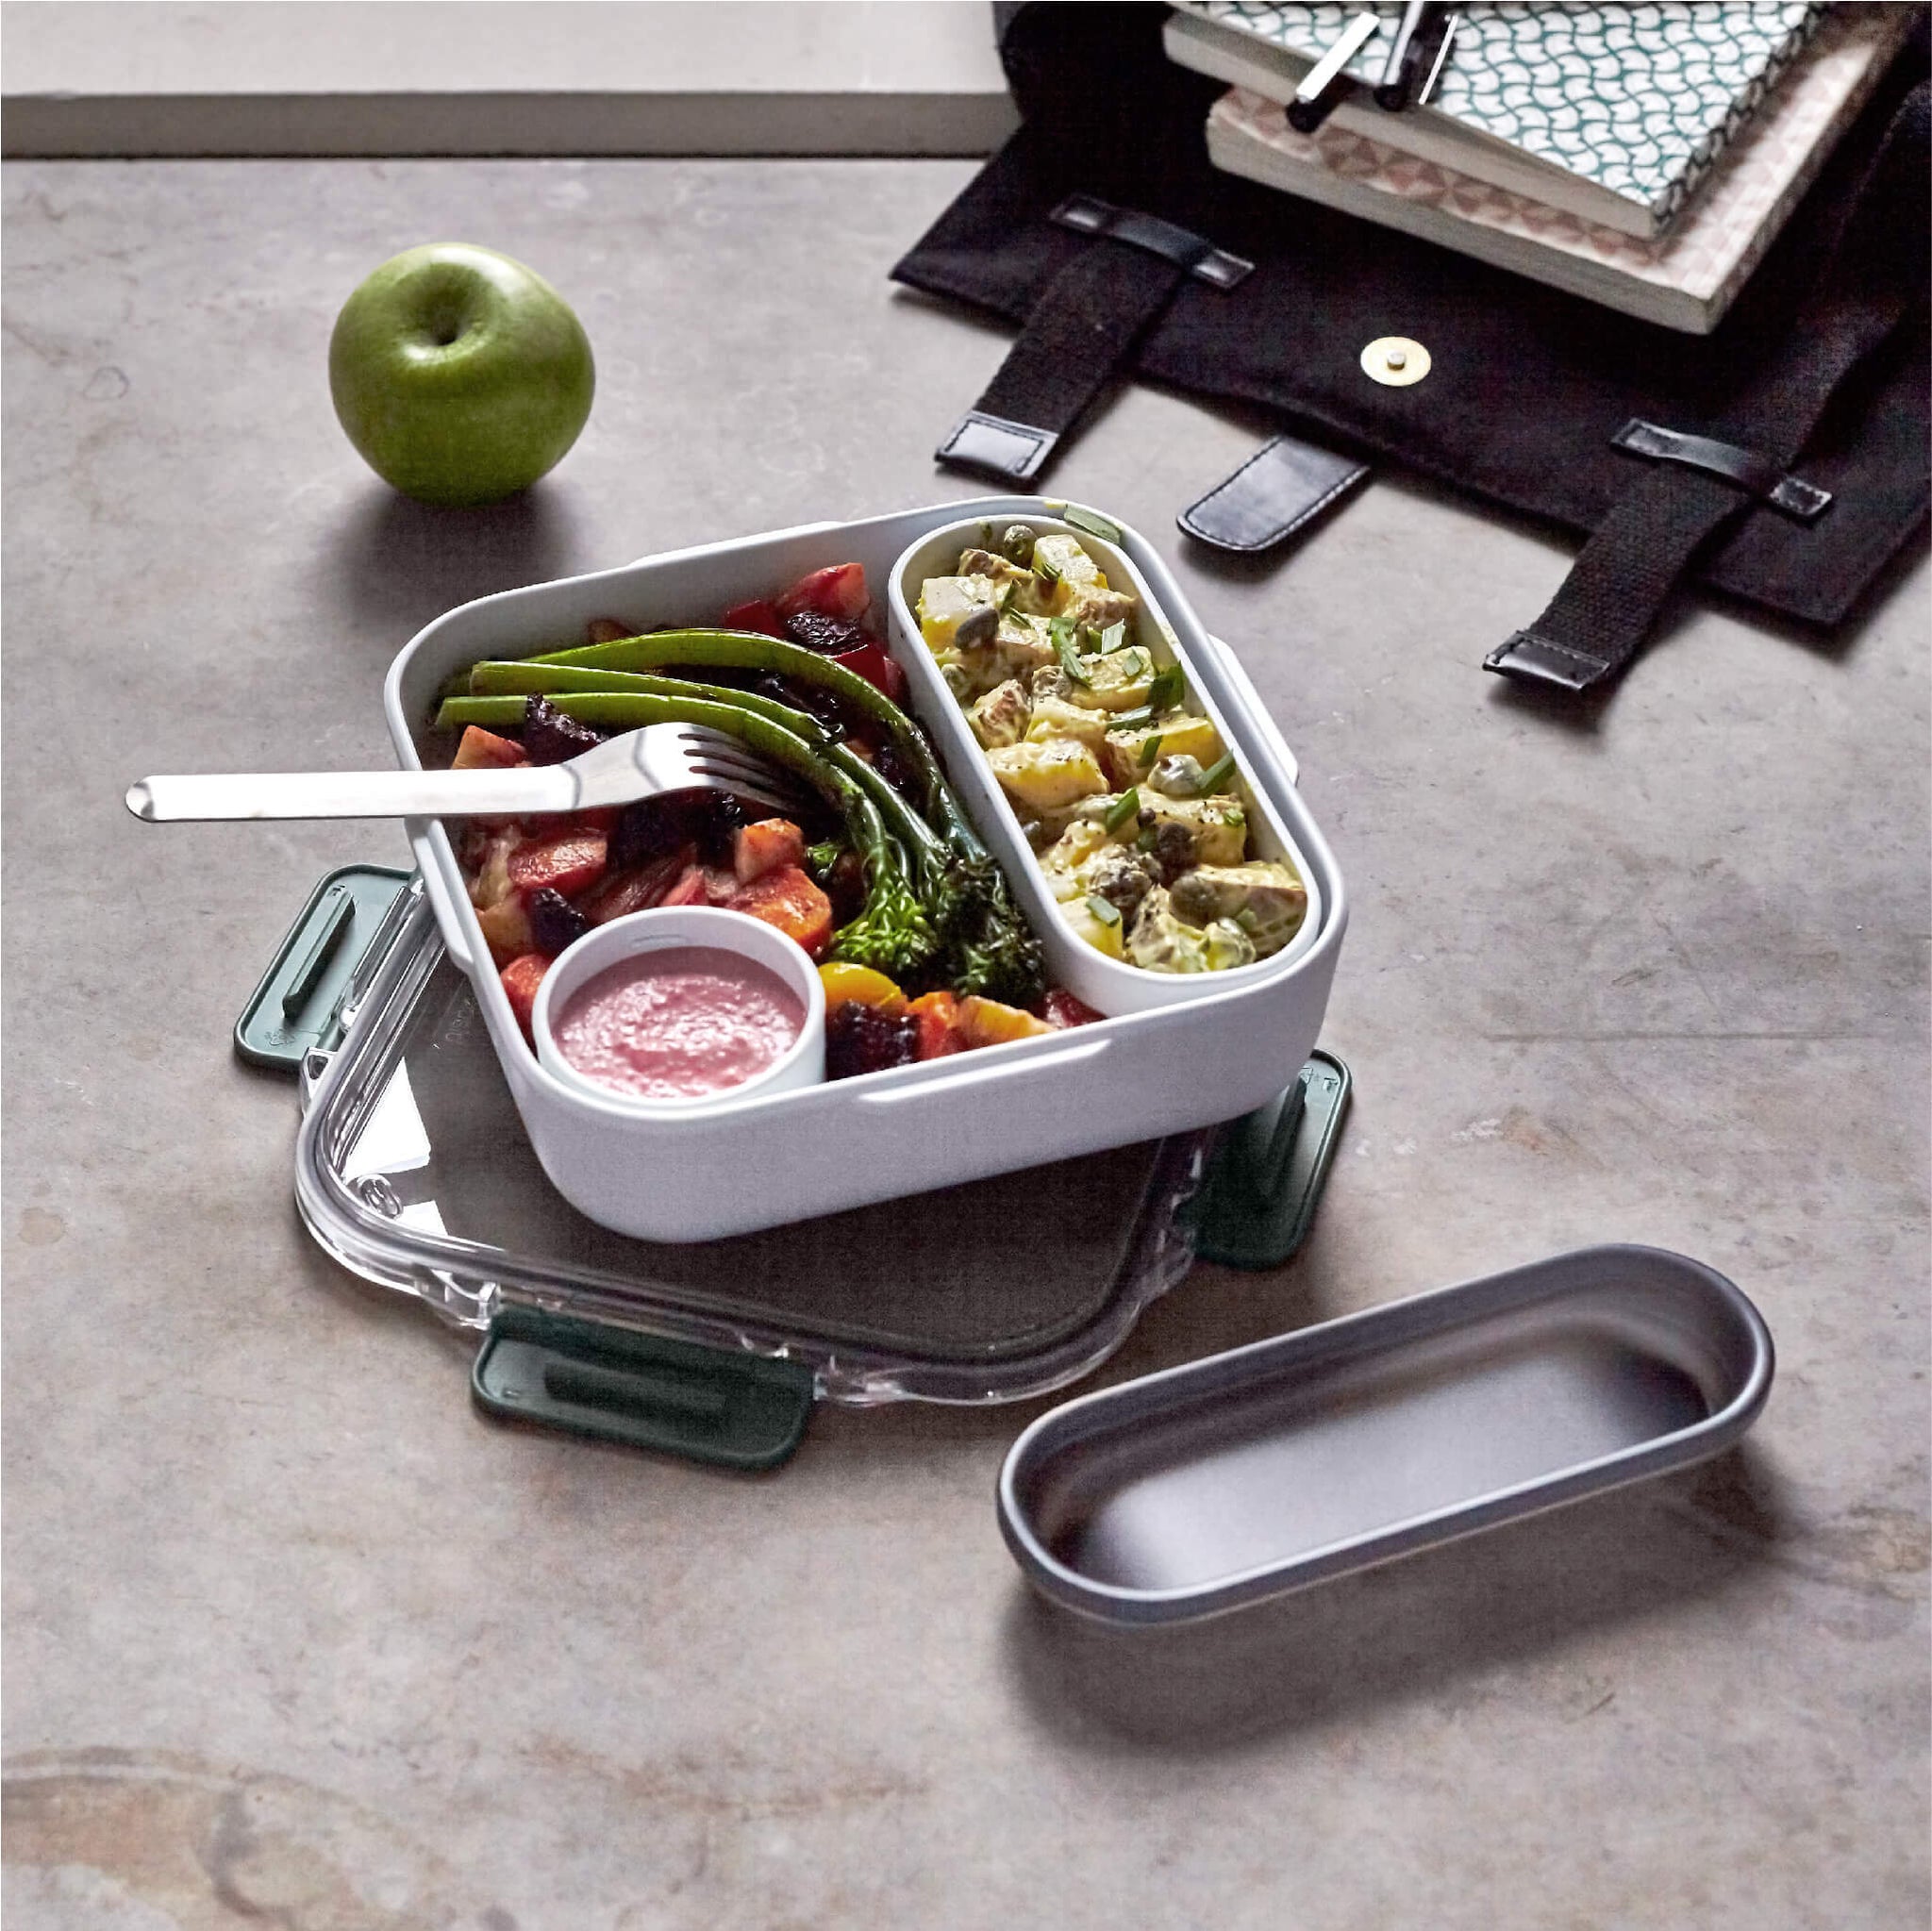 olive color lunch box tupper with cutlery with salad inside